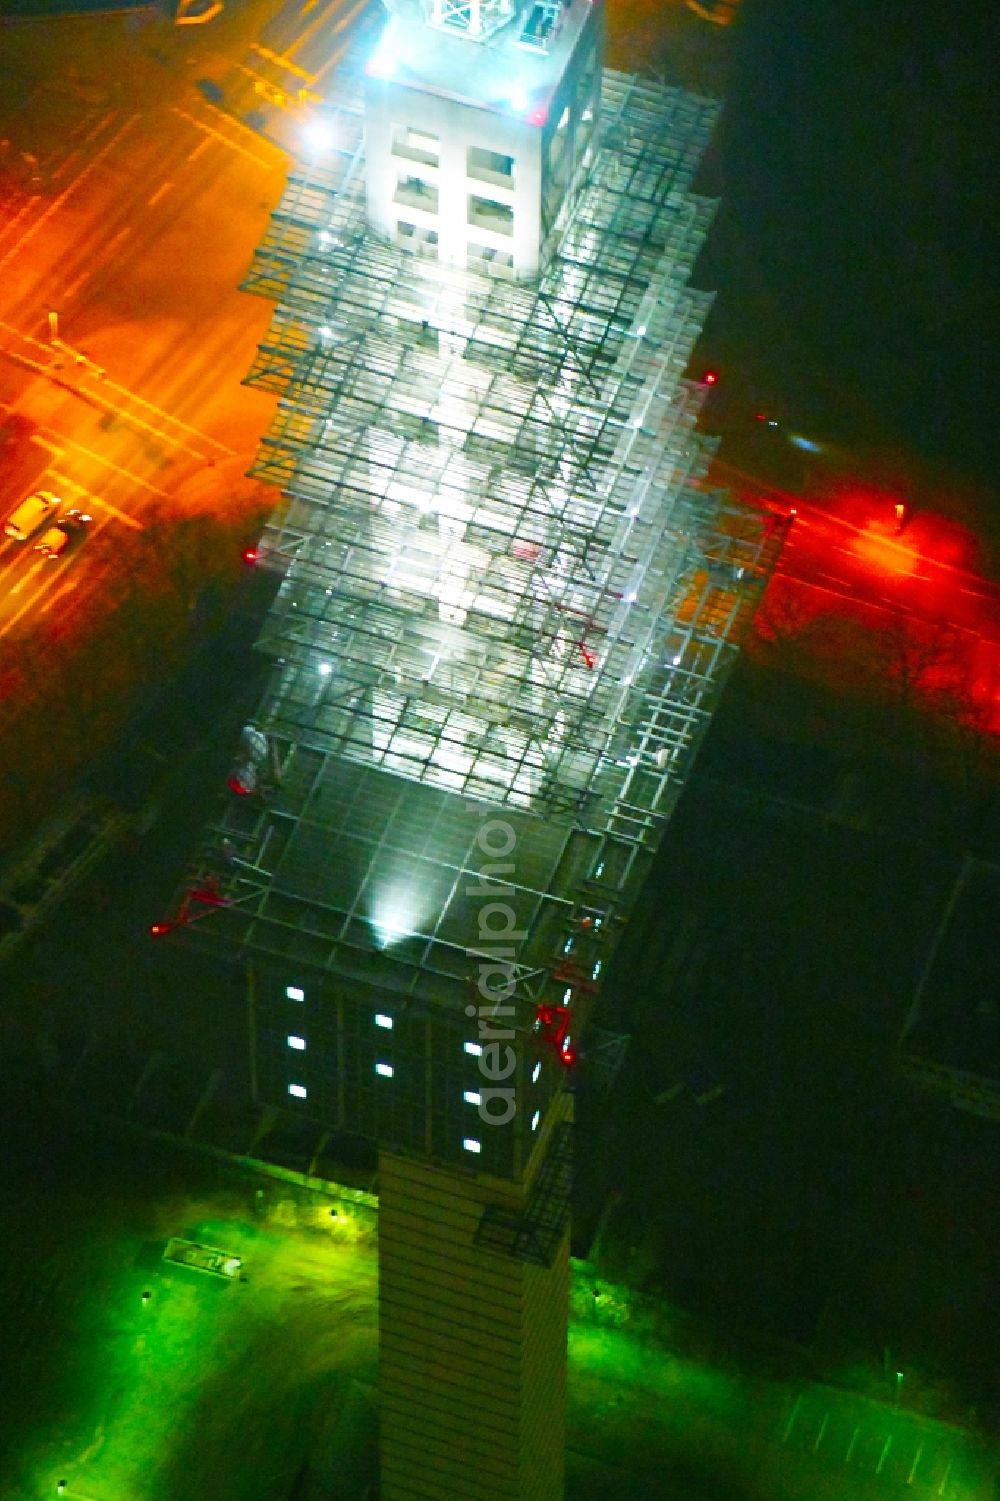 Hannover at night from above - Night lighting Television Tower of DFMG Deutsche Funkturm GmbH on Neue-Land-Strasse in the district Buchholz-Kleefeld in Hannover in the state Lower Saxony, Germany